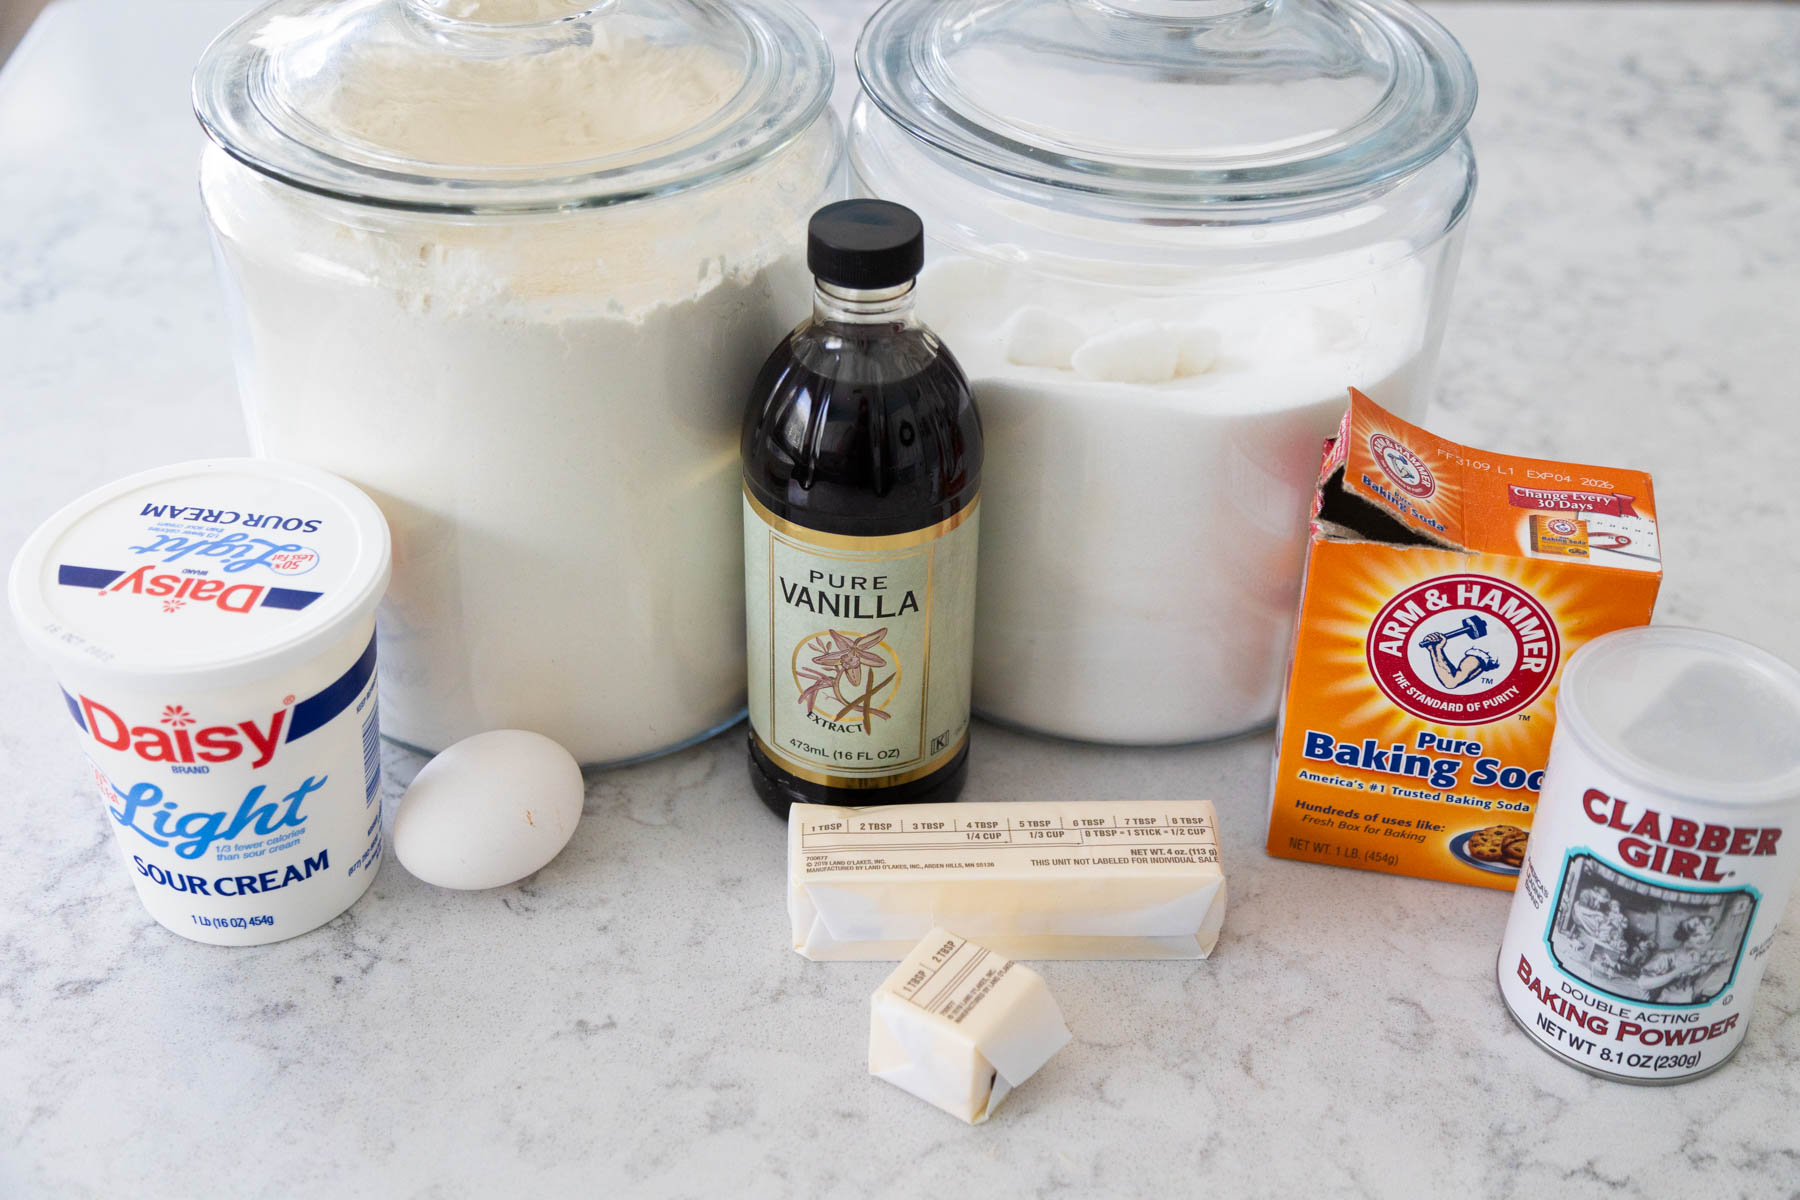 The ingredients to make the soft cookie base are on the kitchen counter.